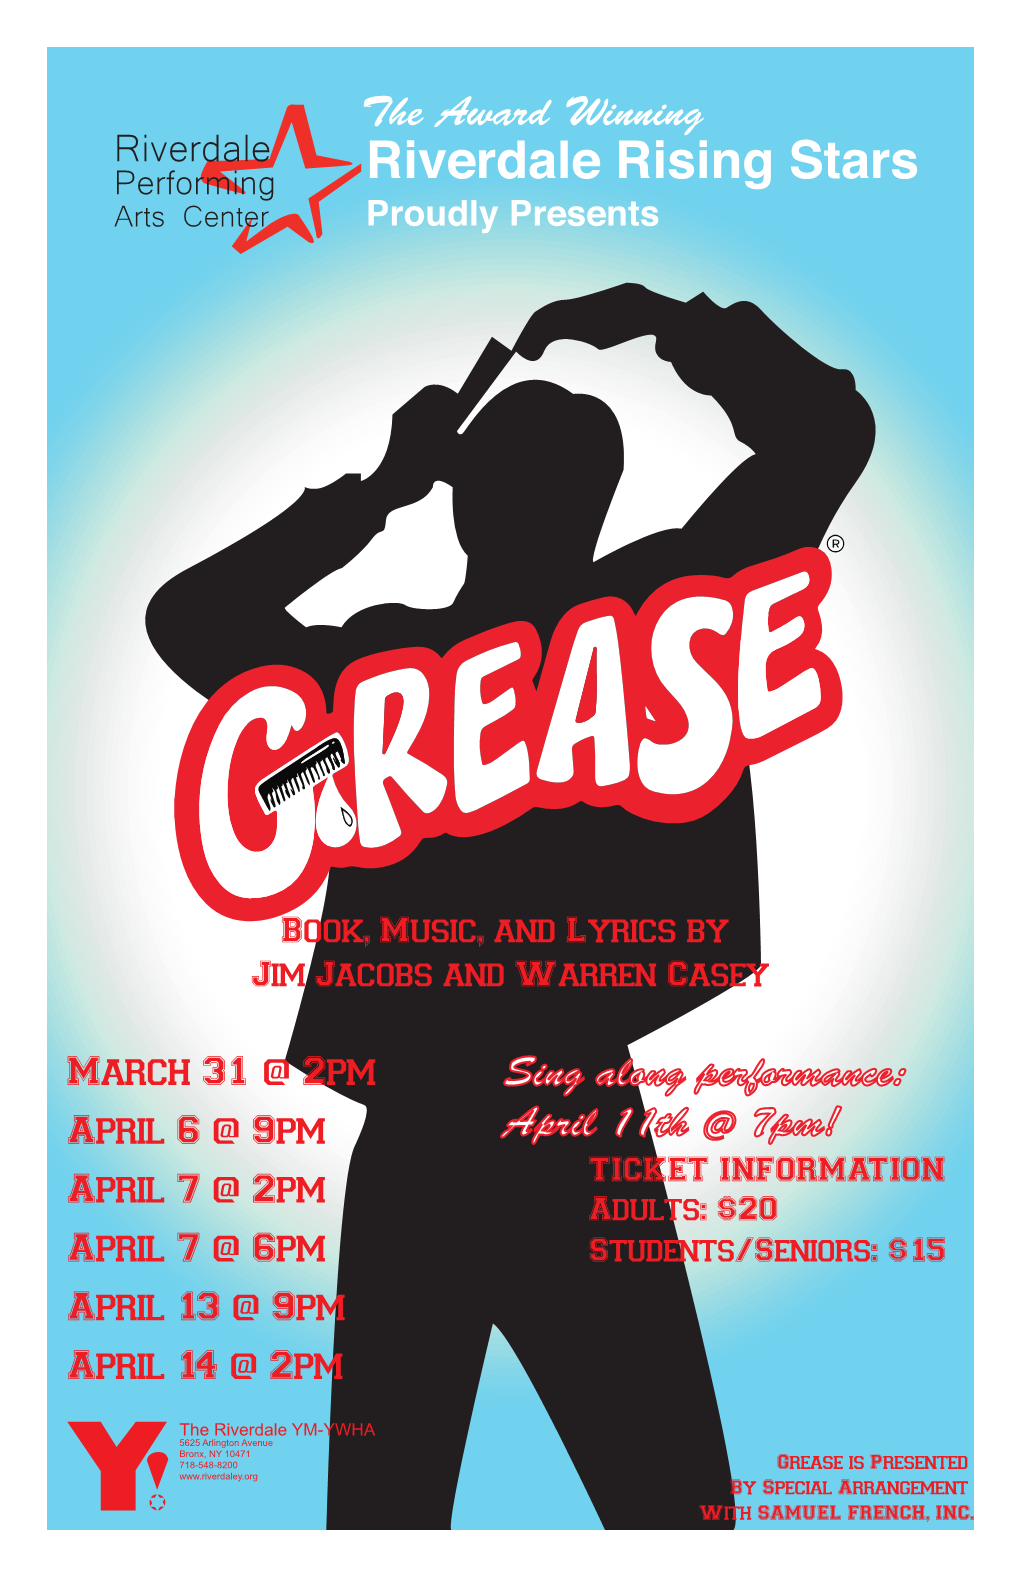 Grease Book, Music, and Lyrics by JIM JACOBS & WARREN CASEY